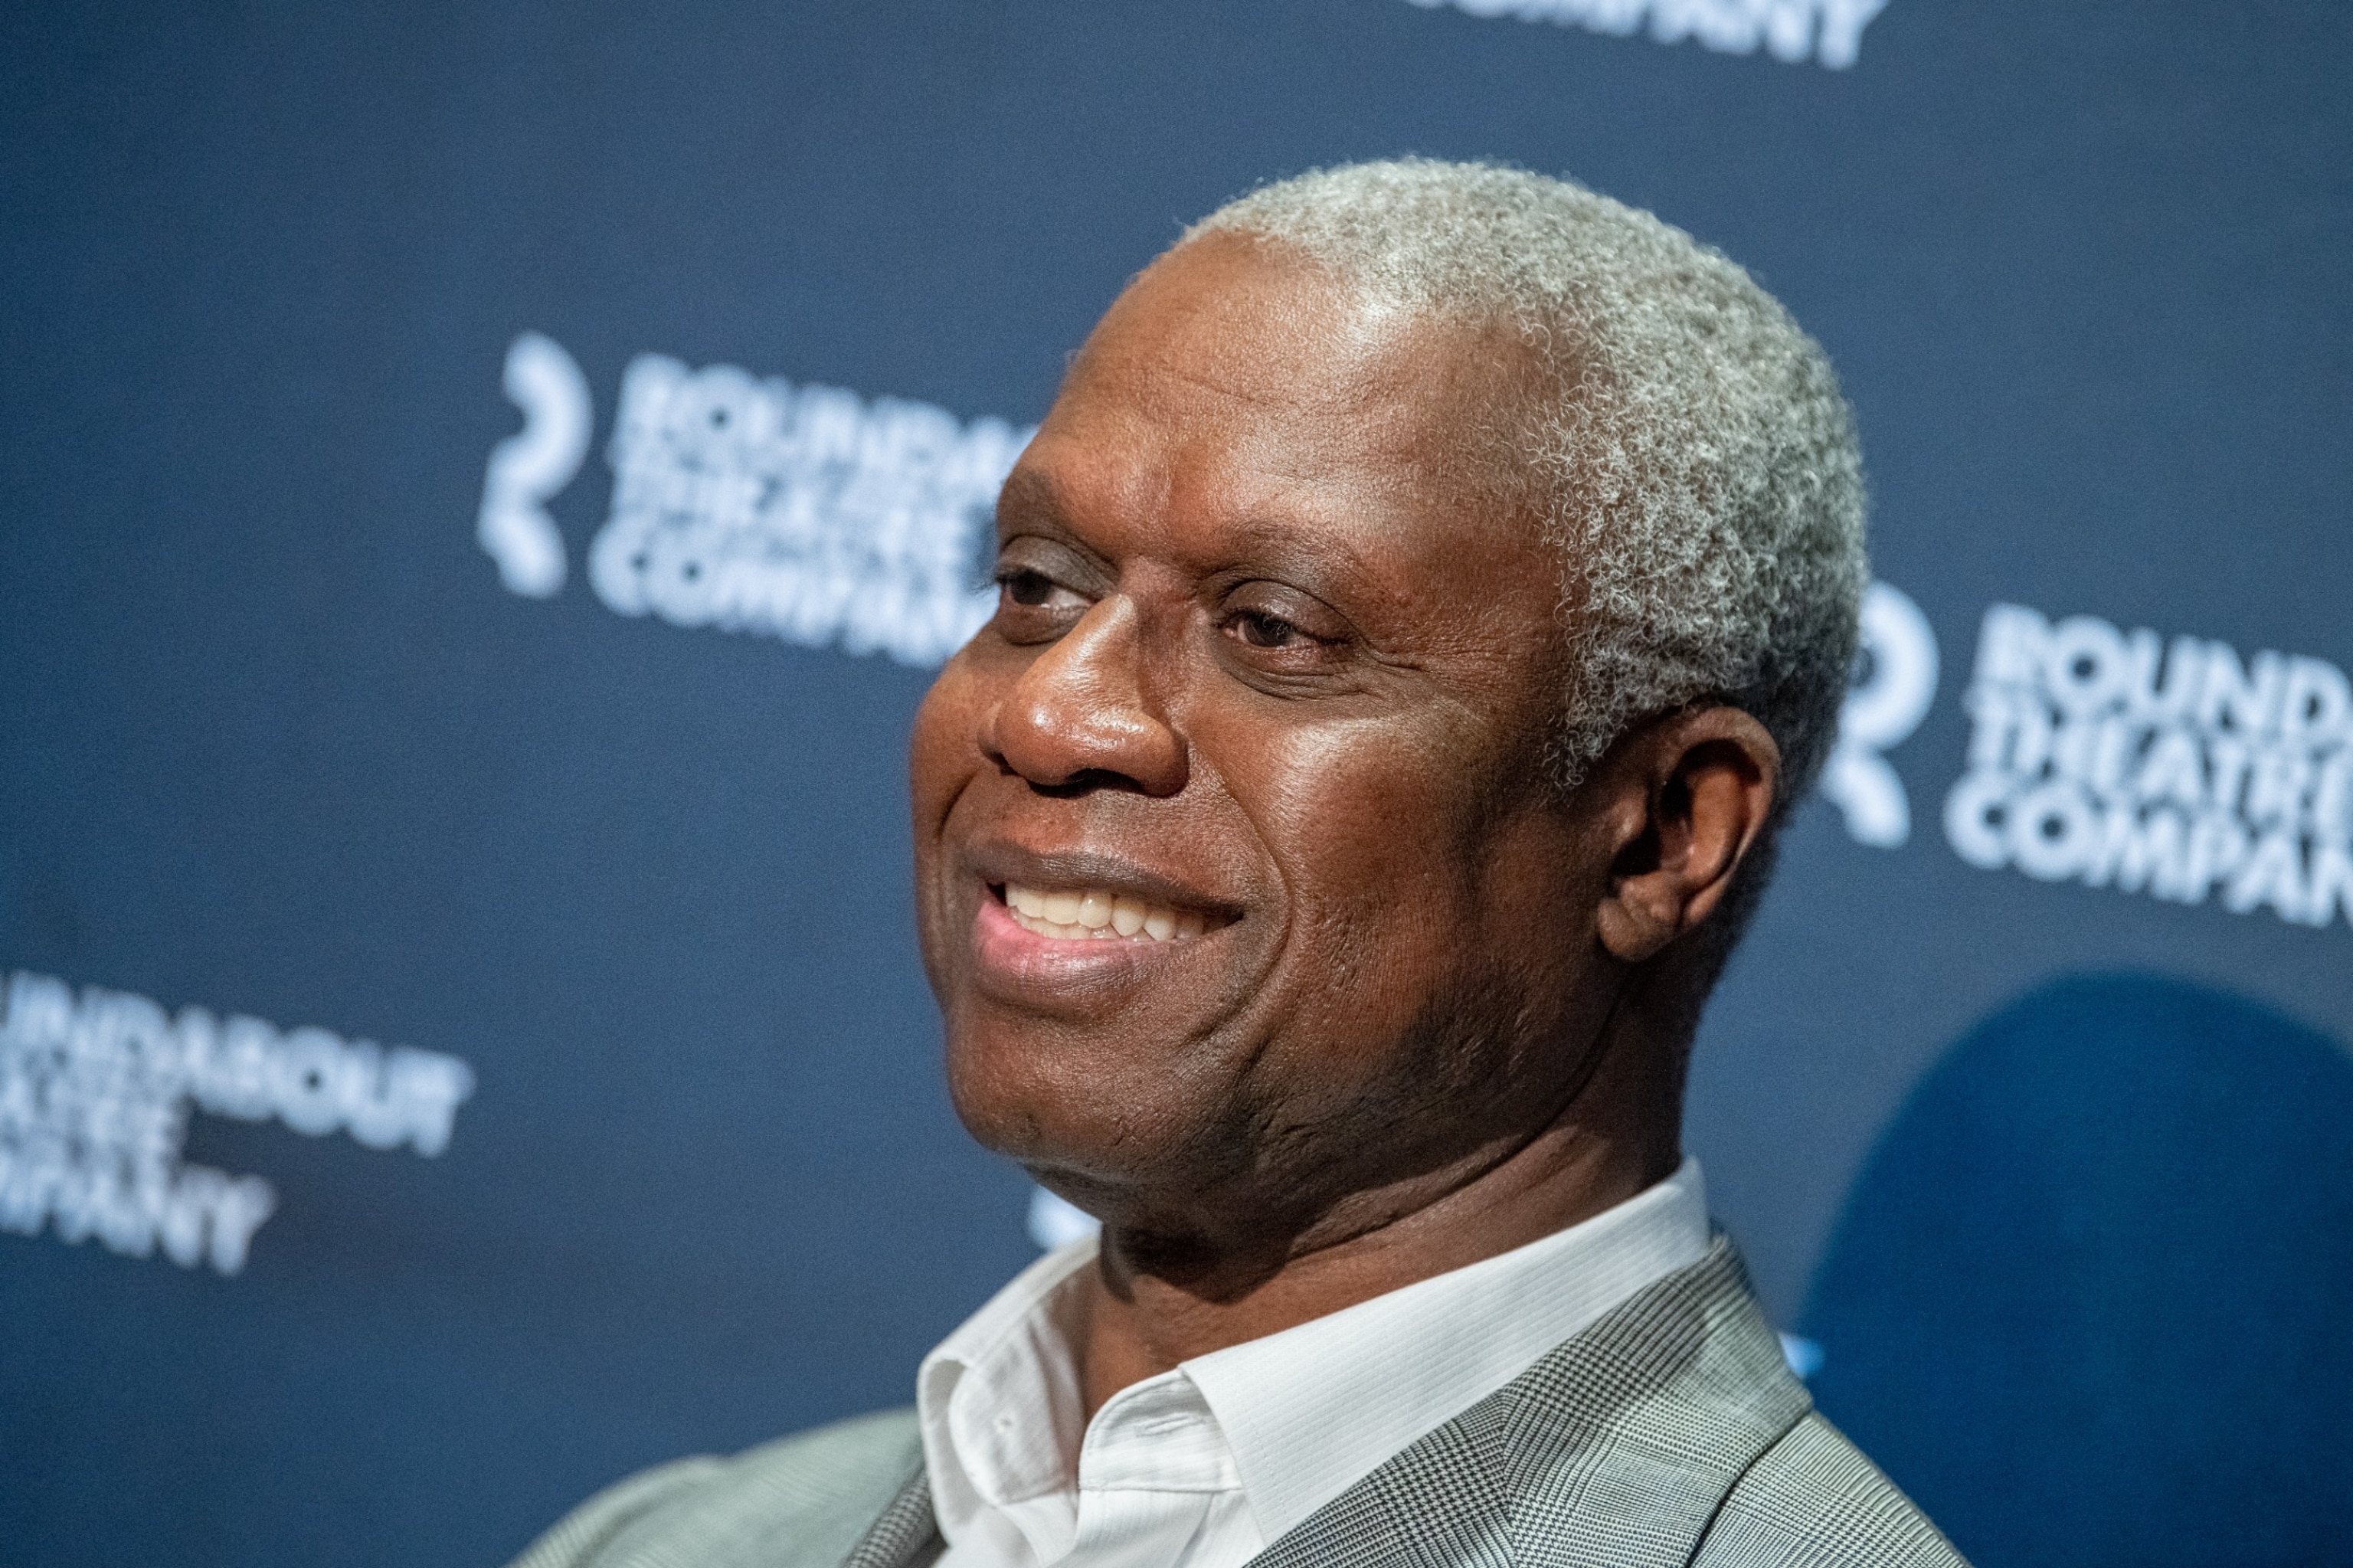 Andre Braugher attends the "Birthday Candles" Photocall at American Airlines Theatre on March 12, 2020 in New York City. (Photo by Roy Rochlin/Getty Images)